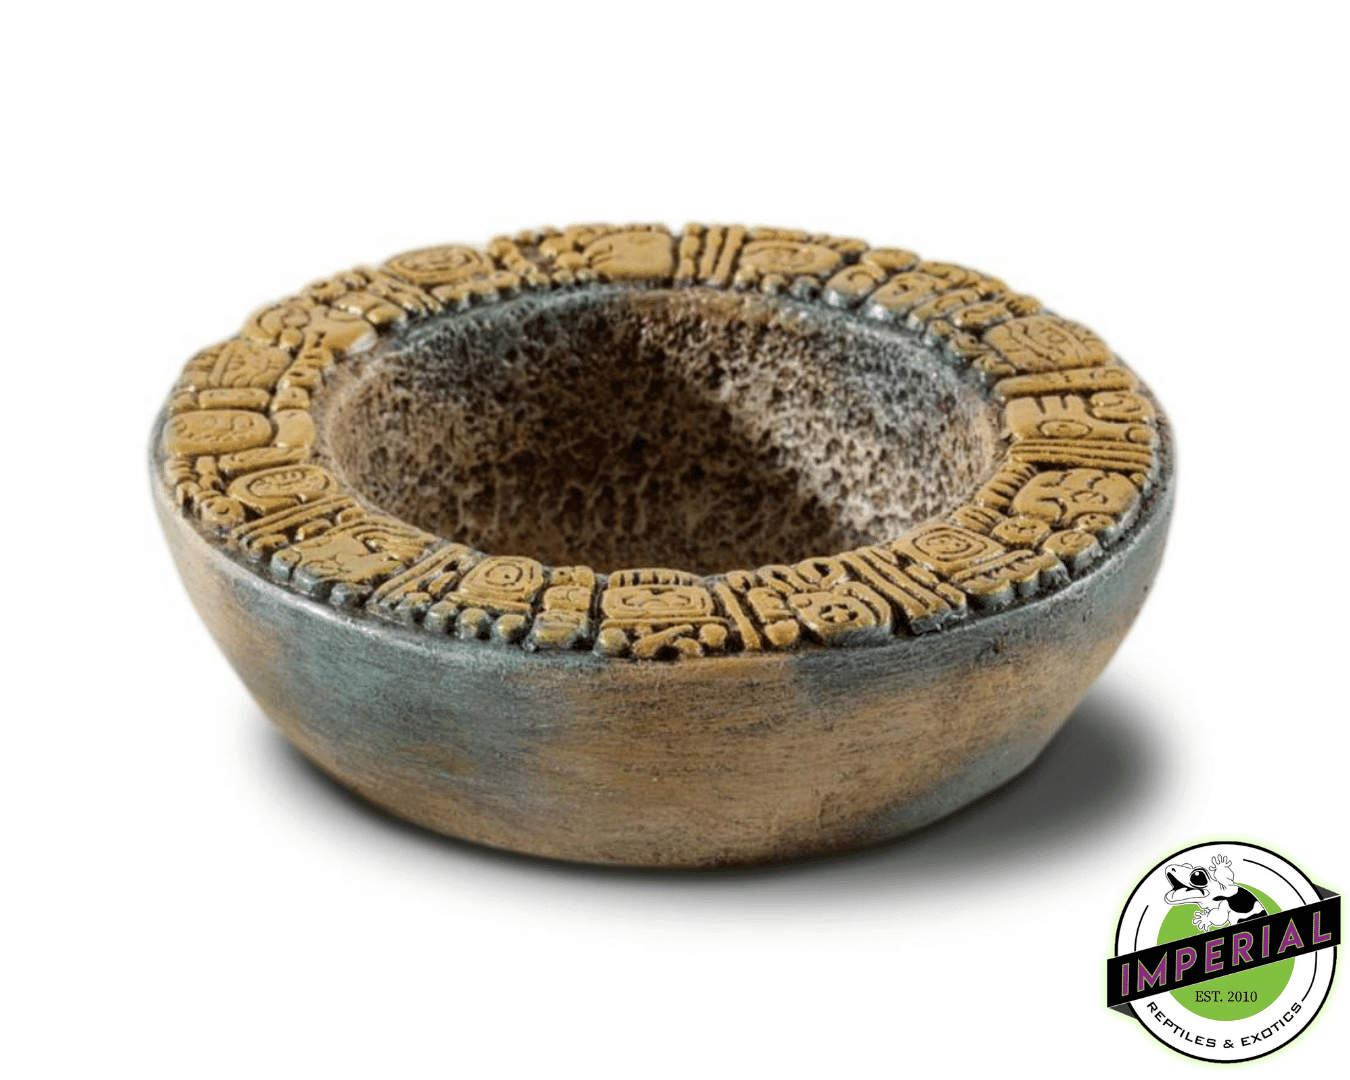 Buy water dish and food bowl for sale online, water bowls and food dishes for pet reptiles